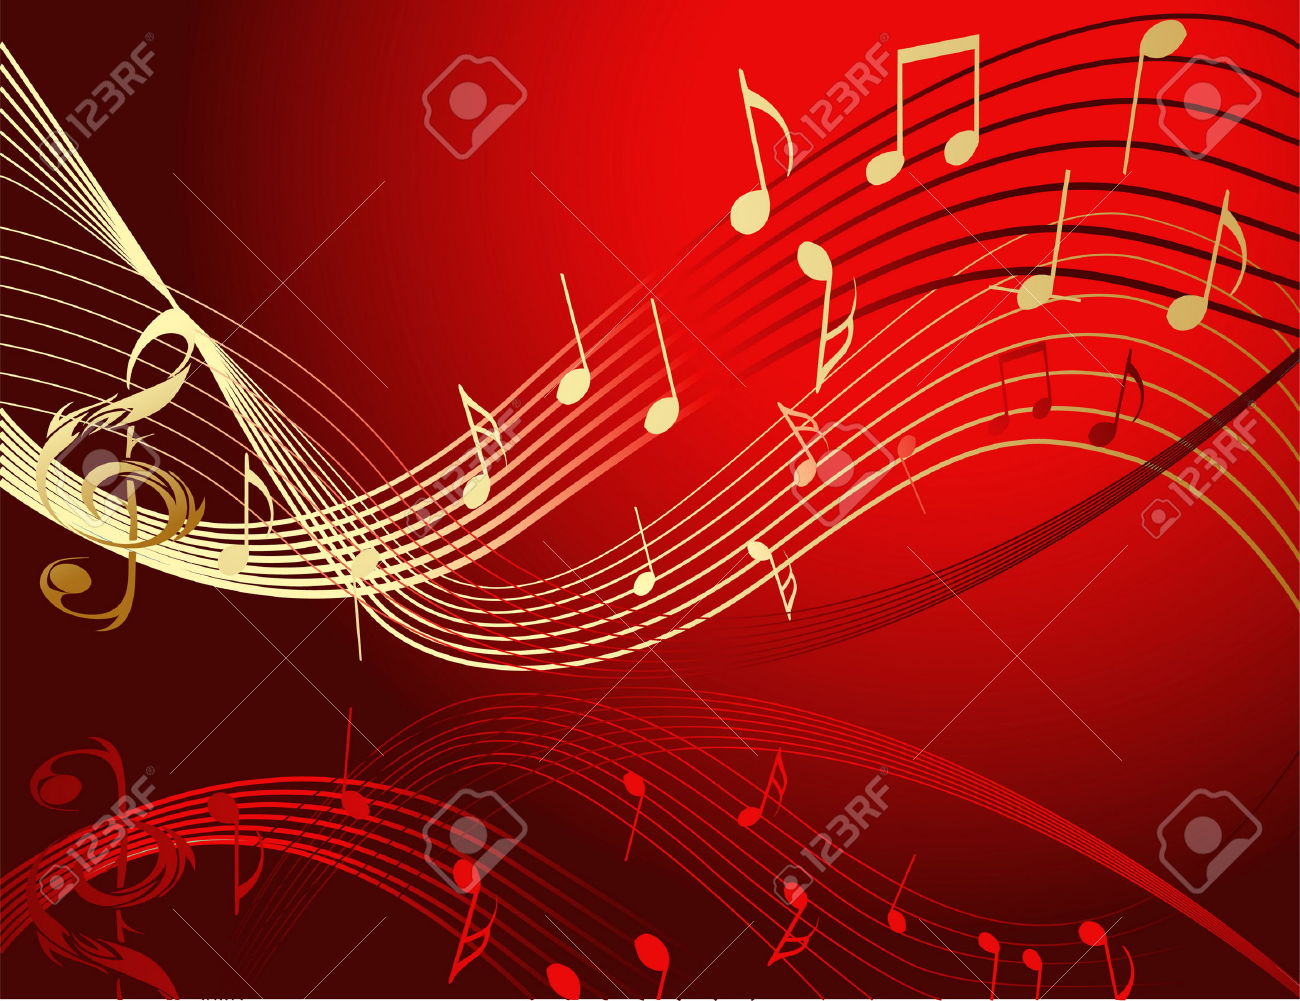 download background music for youtube videos